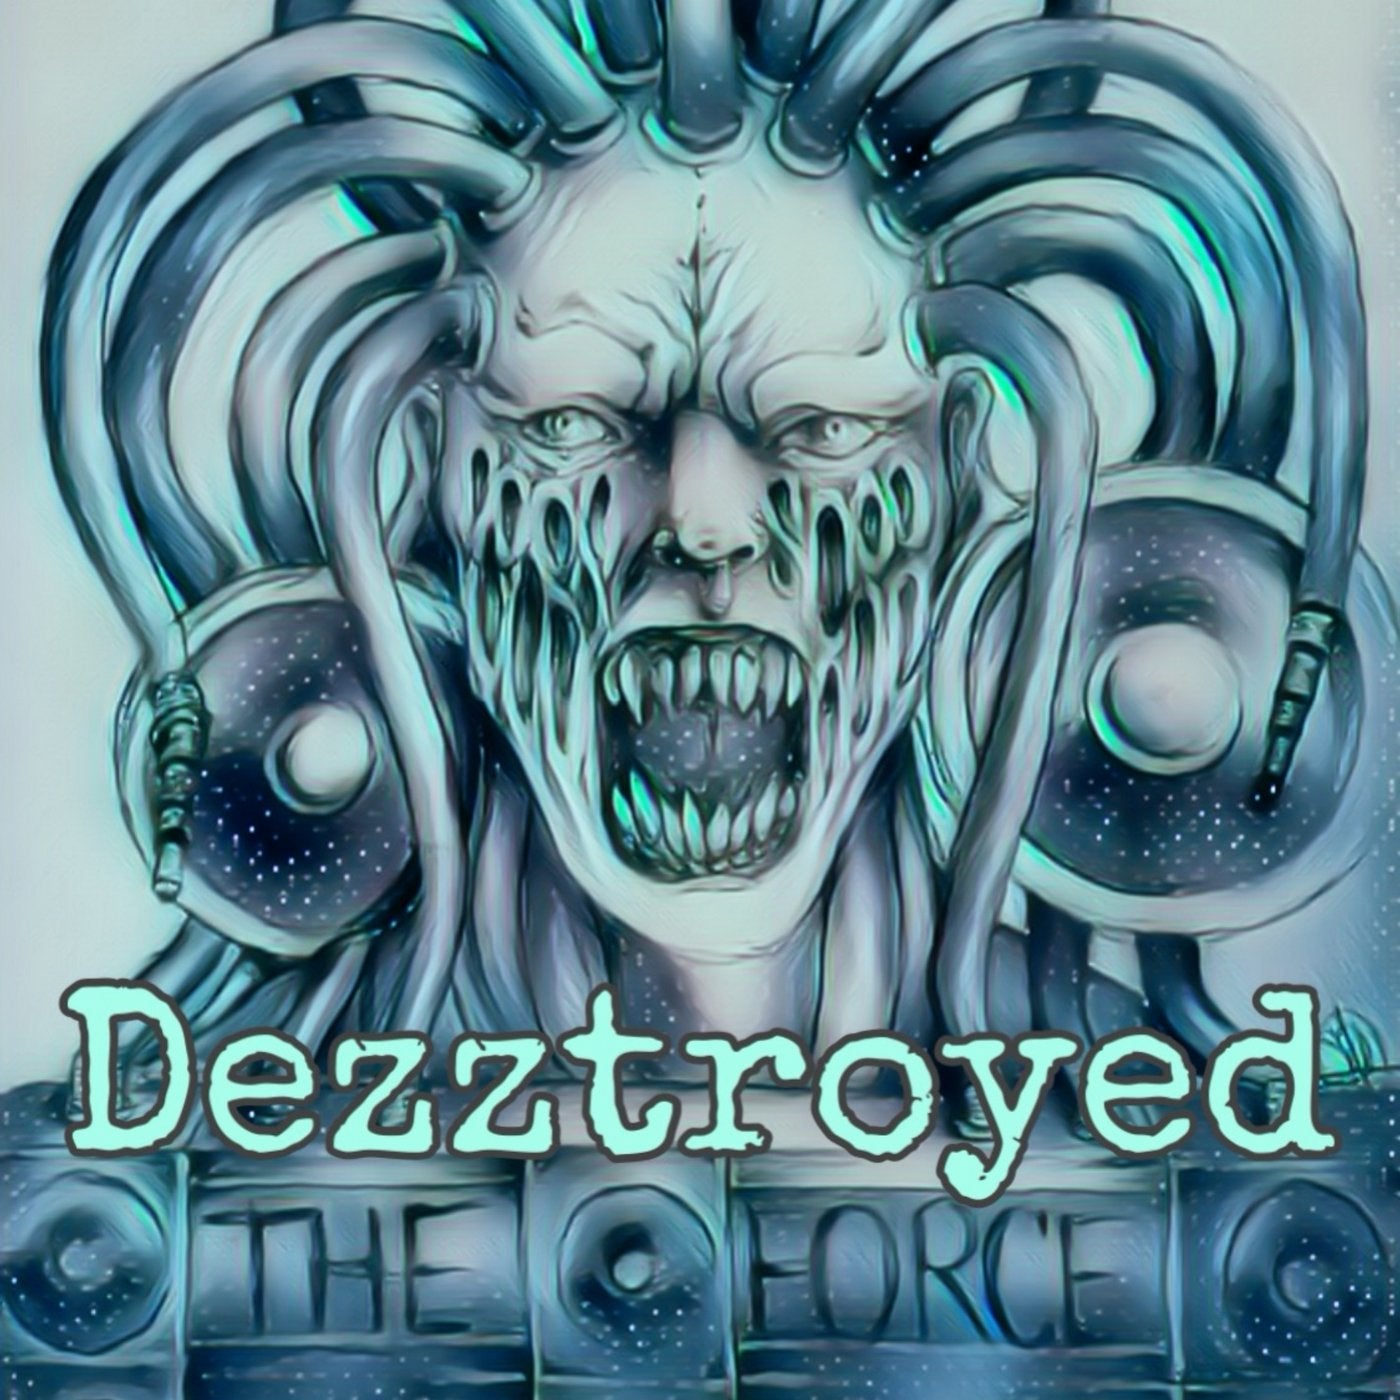 Dezztroyed